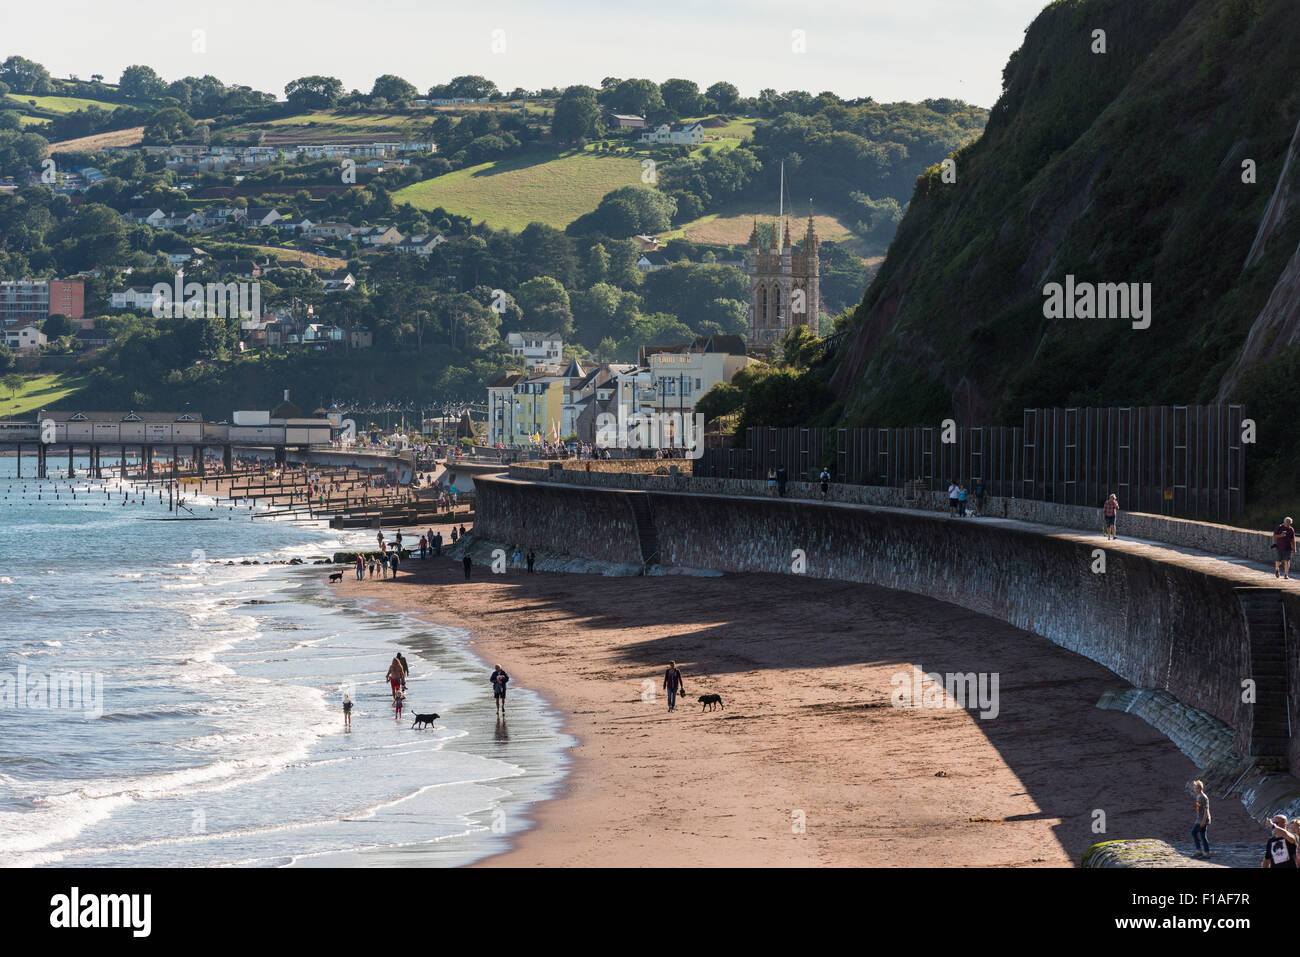 Teignmouth, Devon. 2015. The famous Brunel seawall coast rail. Town in the background and people walking their dogs on the beach Stock Photo